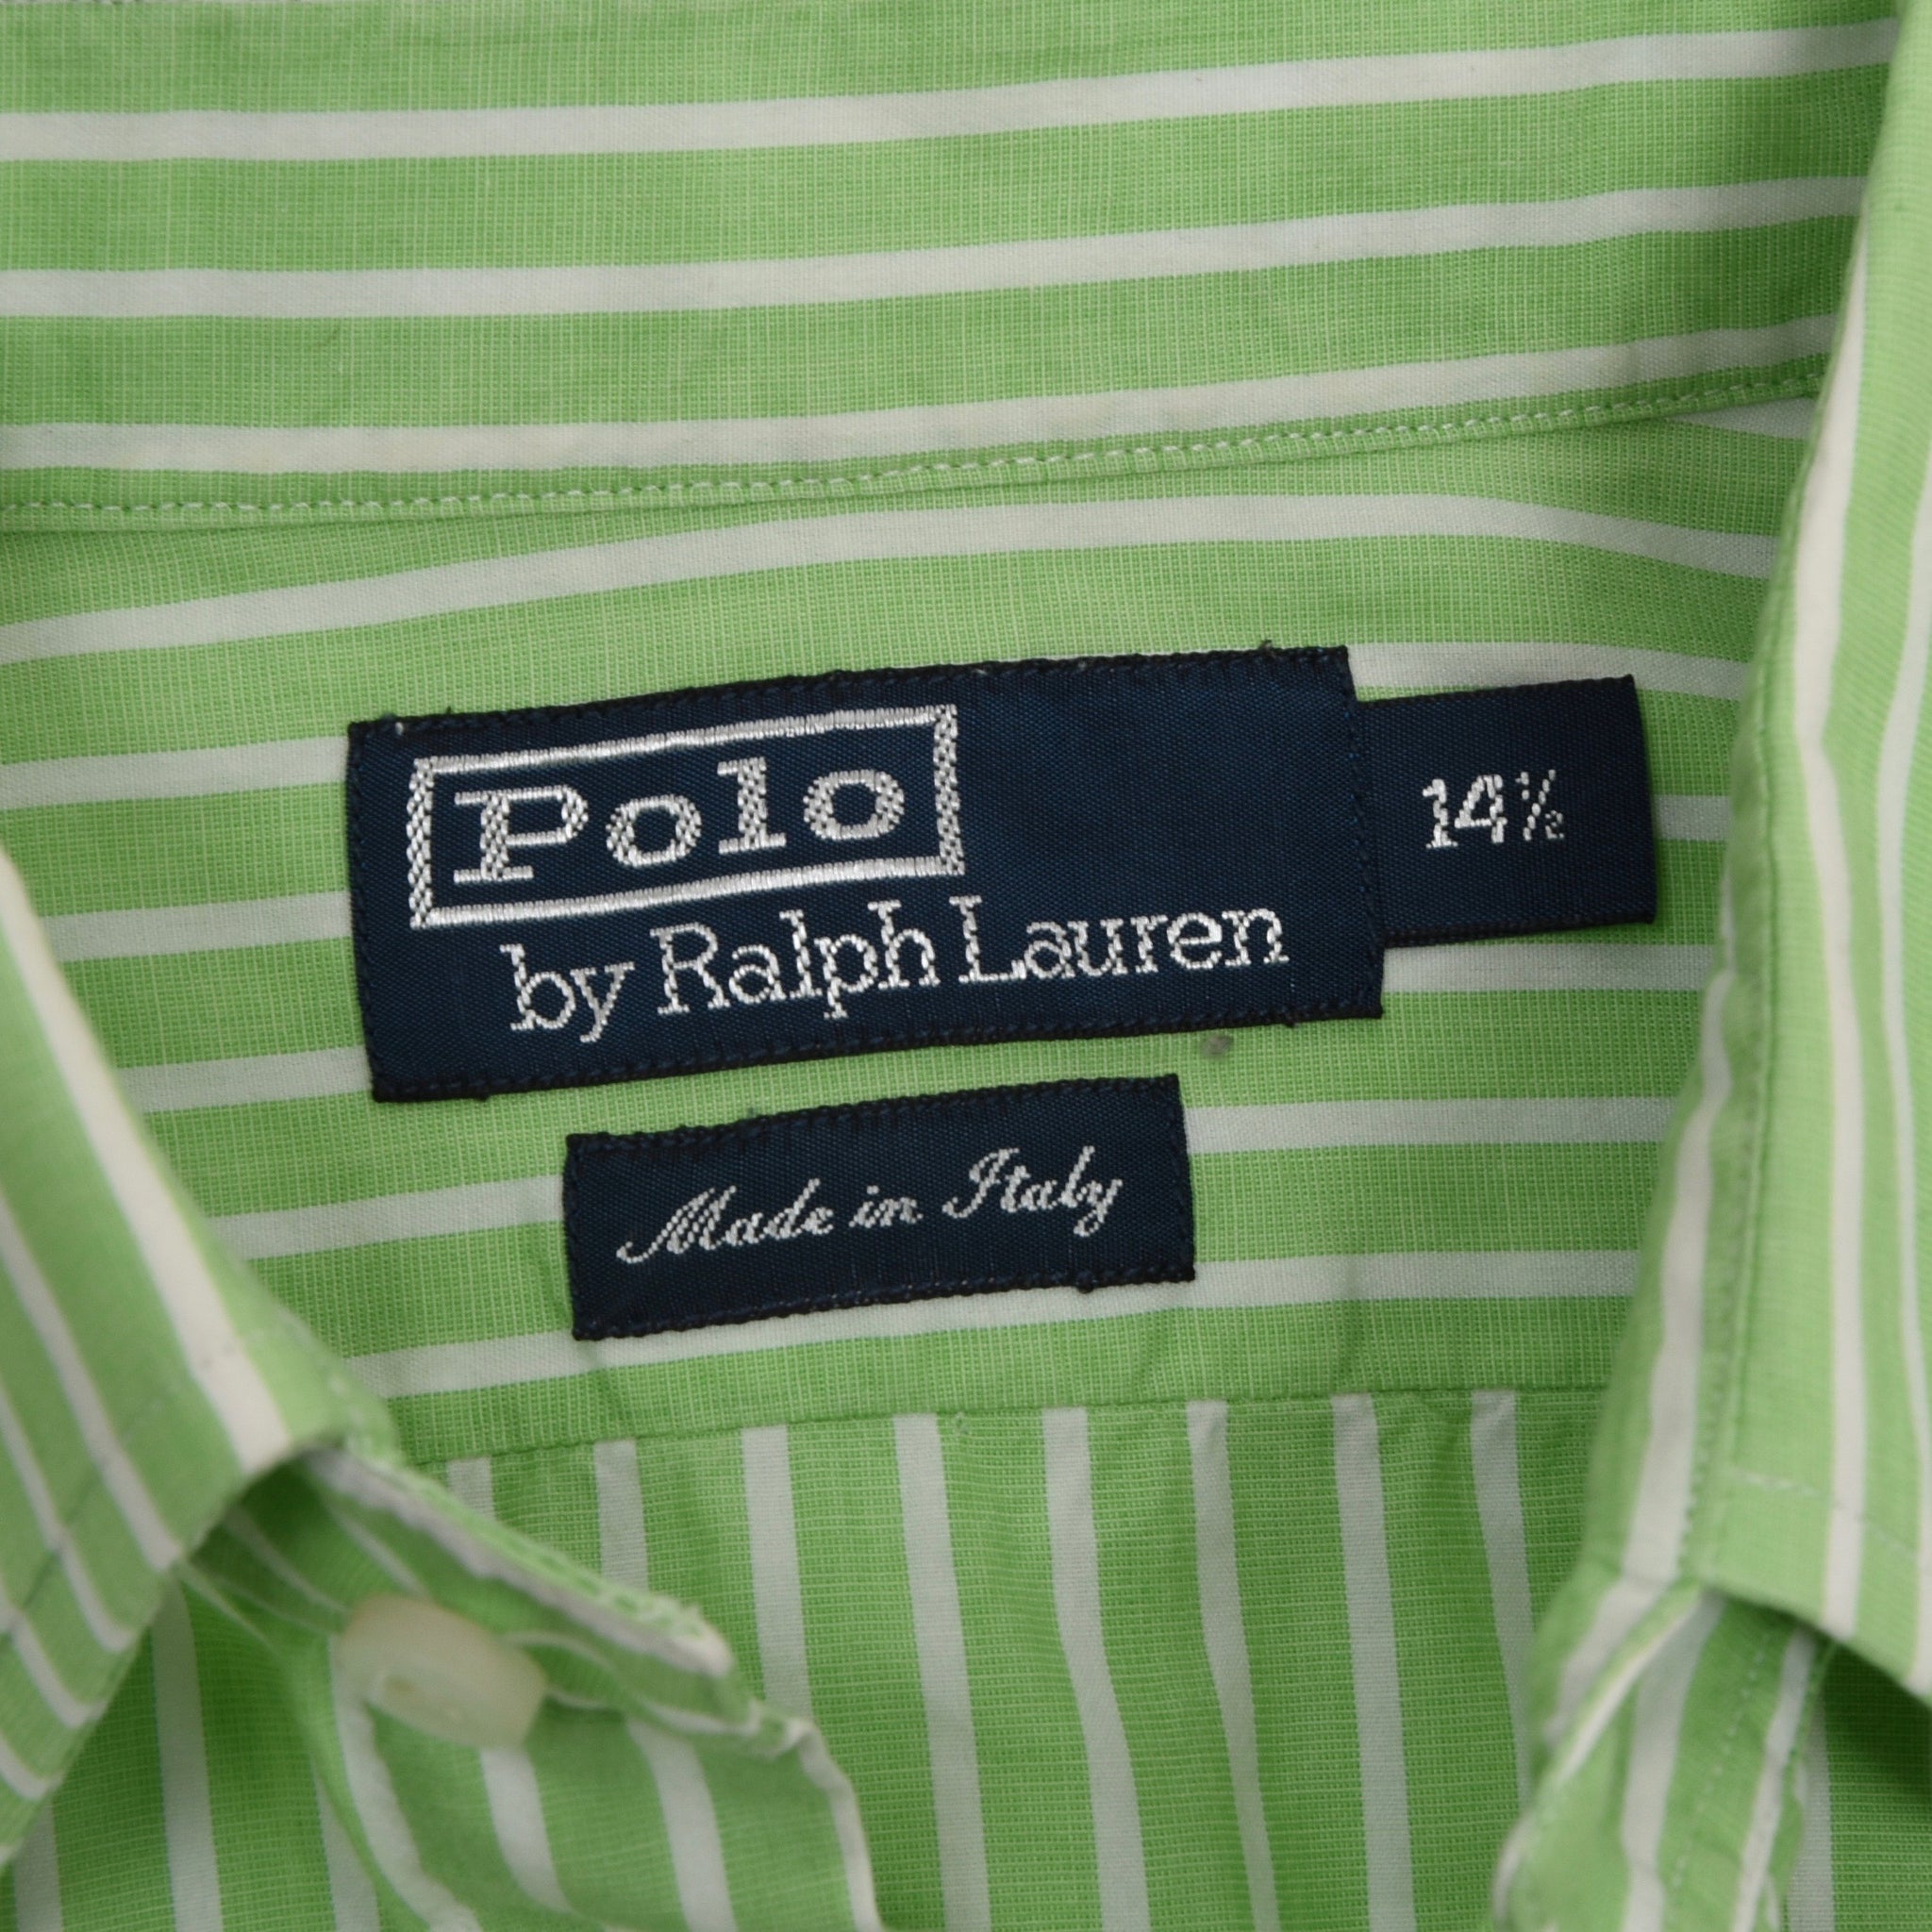 Polo Ralph Lauren Made in Italy Shirt Size 14.5 - Green Stripe